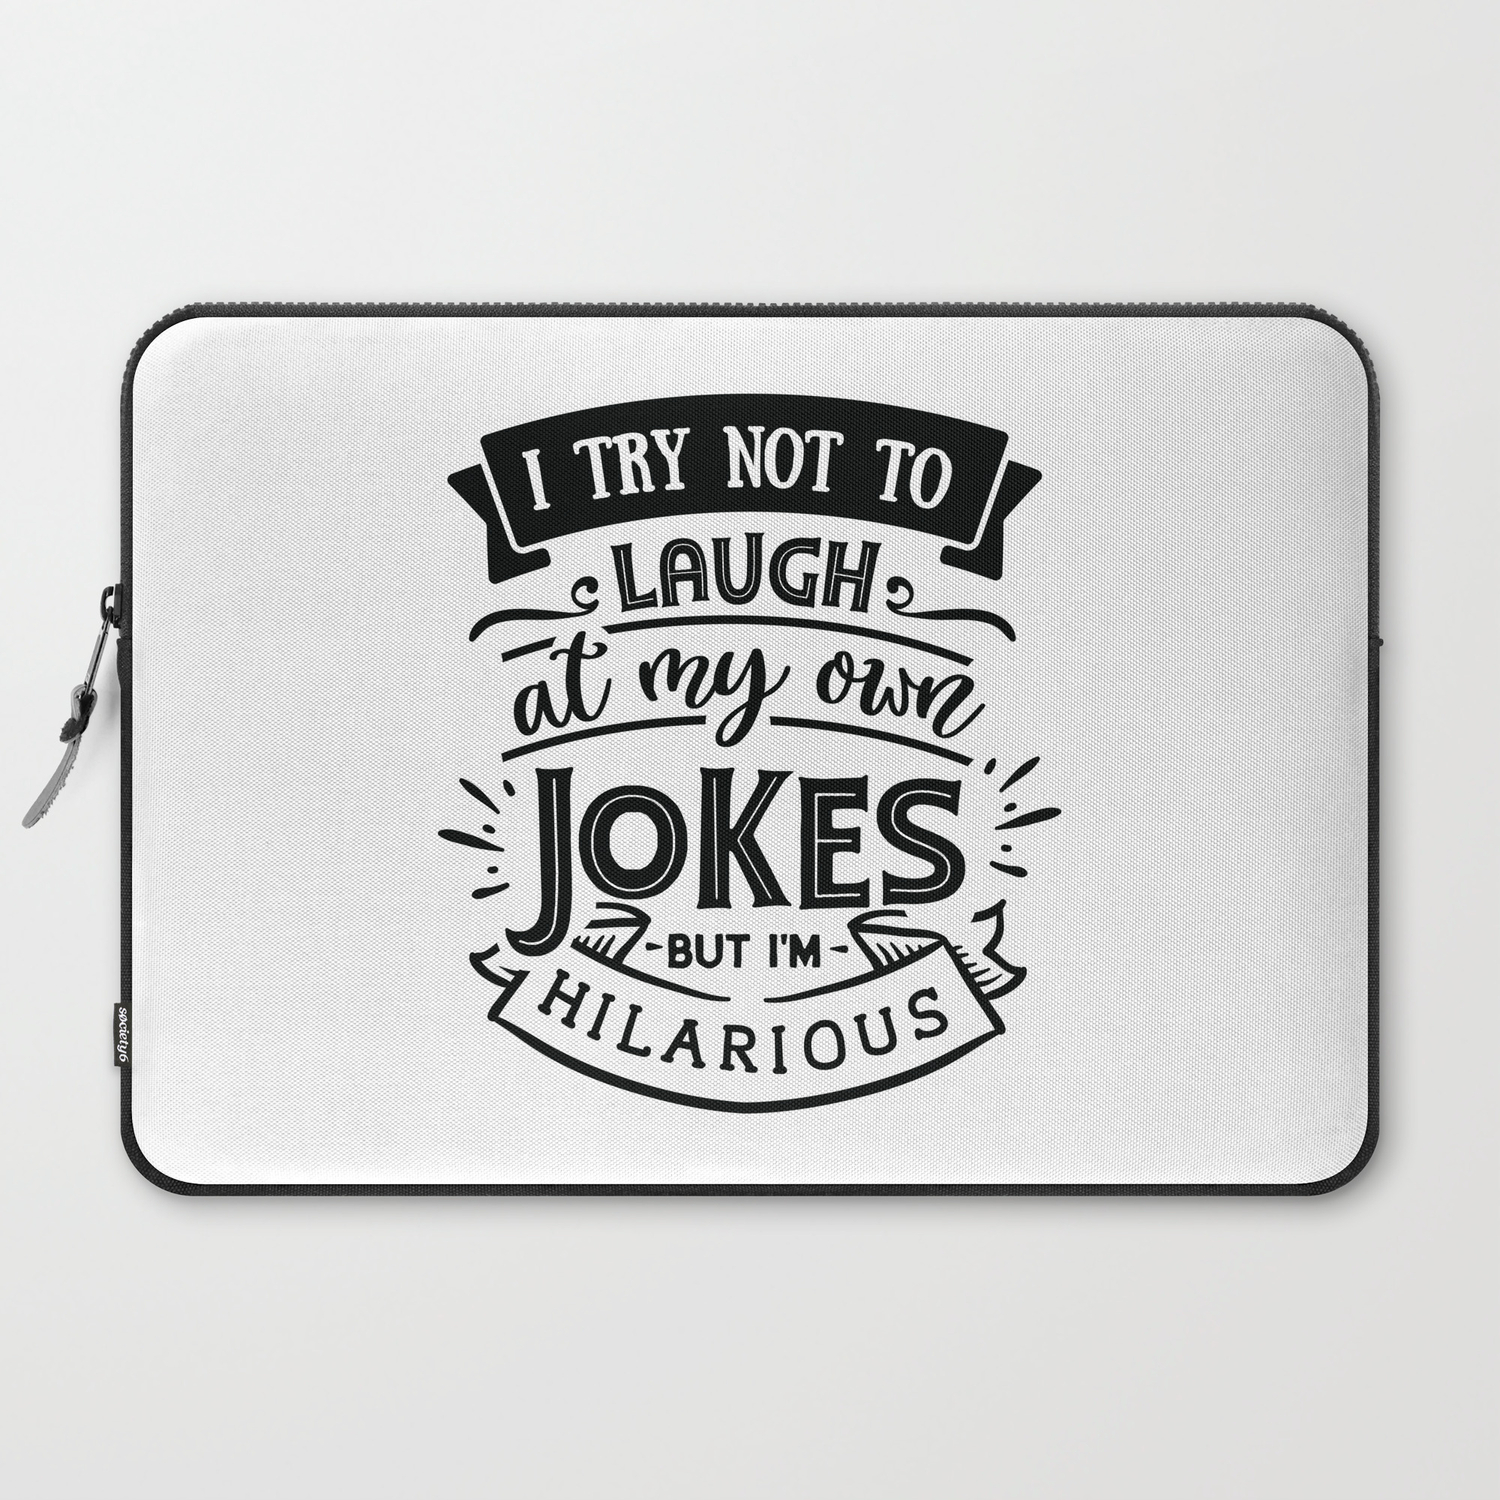 I try not to laugh at my own jokes but I'm hilarious - Funny hand drawn  quotes illustration. Funny humor. Life sayings. Laptop Sleeve by The Life  Quotes | Society6